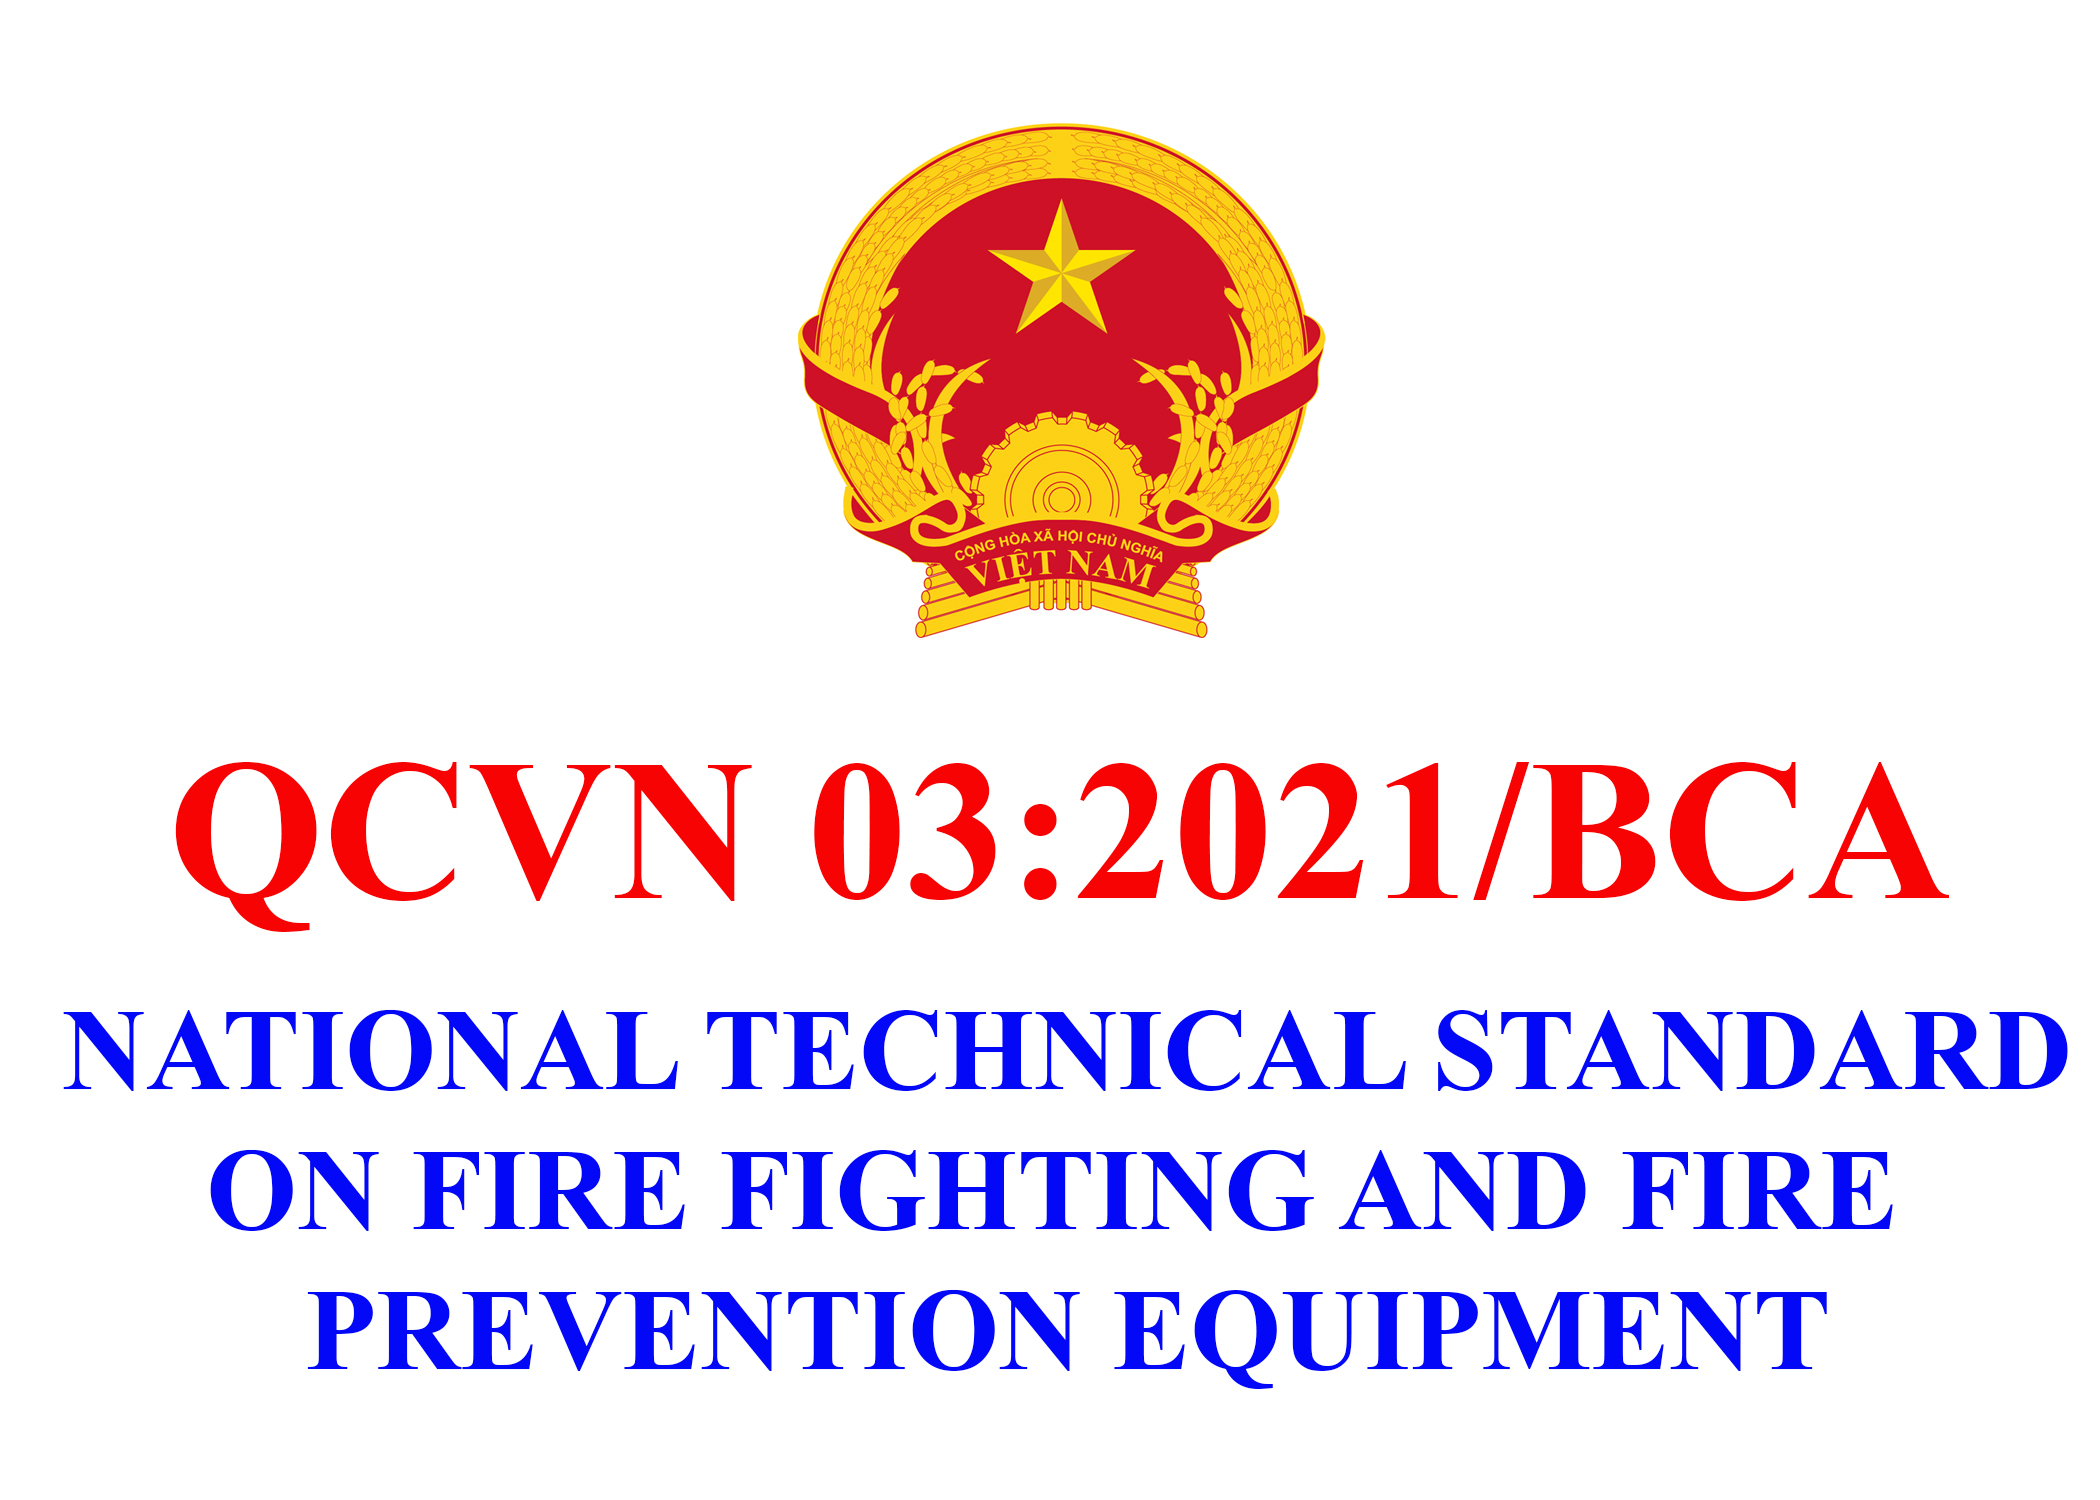 The Ministry of Public Security issues the National Technical Standard on Fire Fighting and Fire Prevention Equipment.